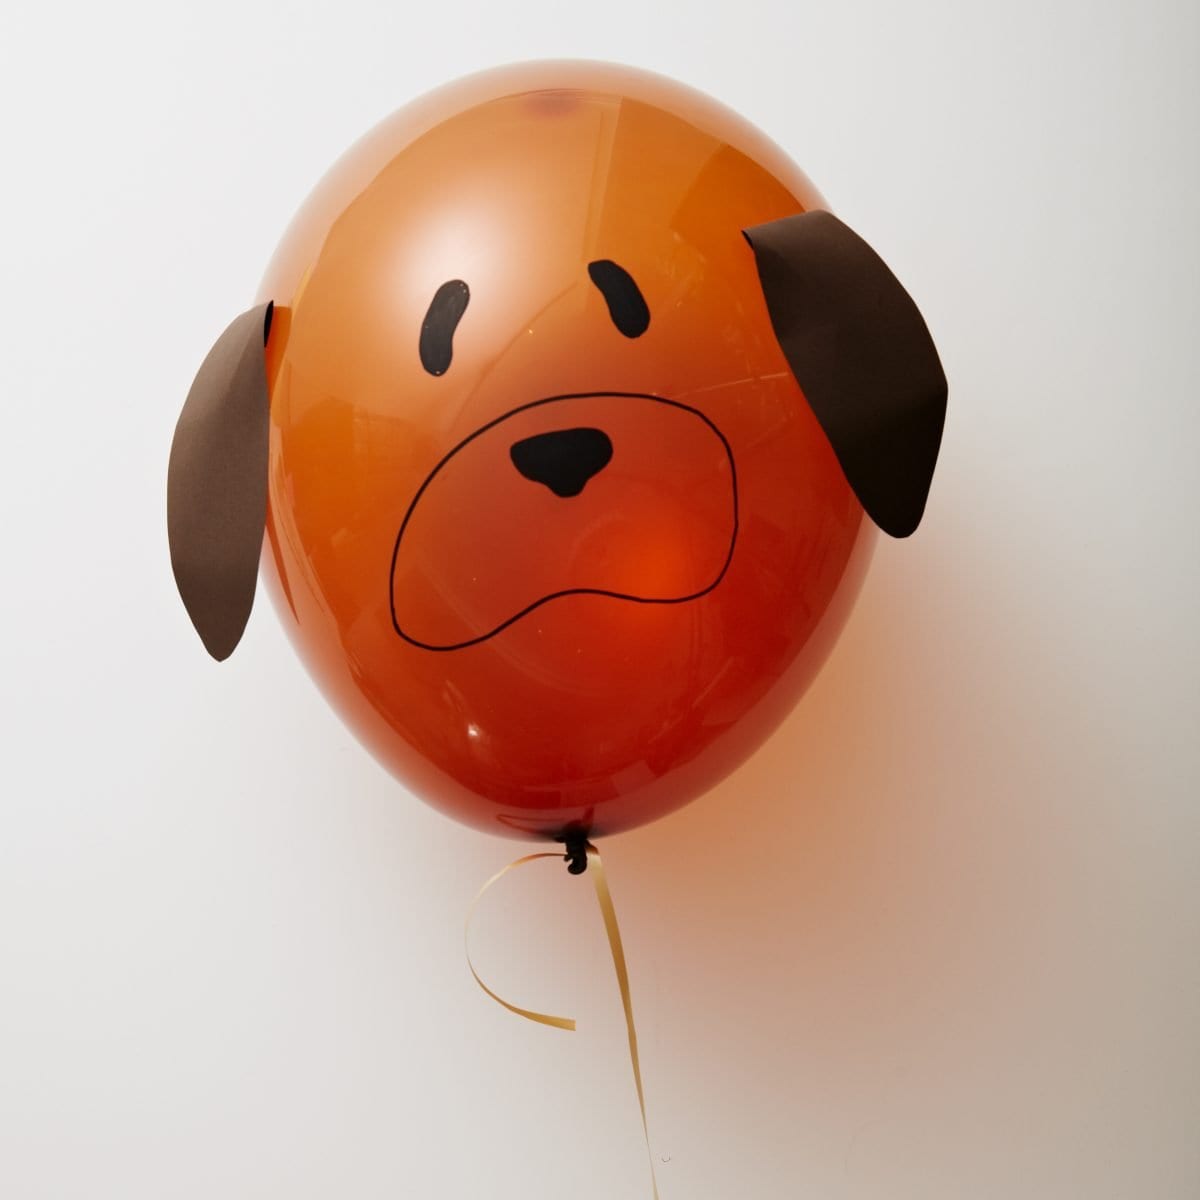 darcy_miller_how_to_dog-balloon_01